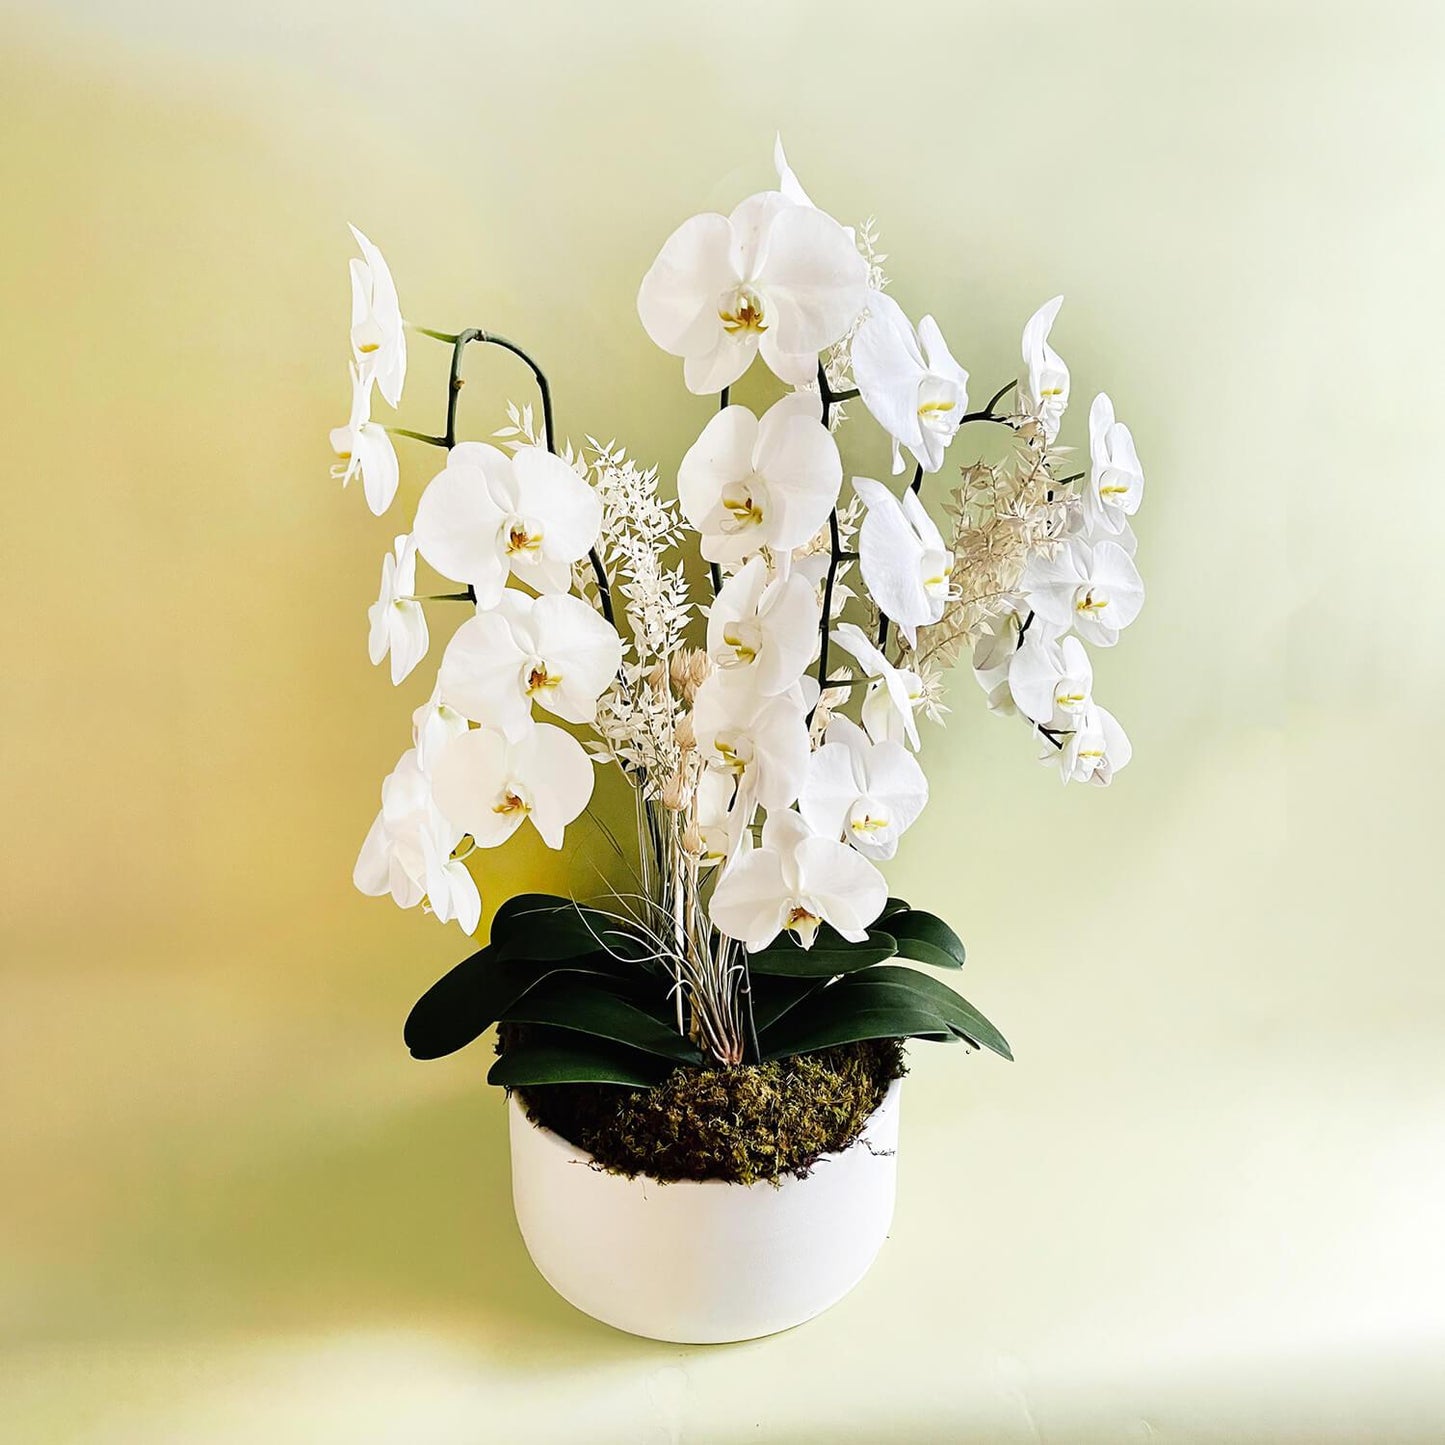 A beautiful tribute arrangement of white orchids in a white pot against a soft green background. Order online for sympathy & event flowers from the best florist in Toronto near you.